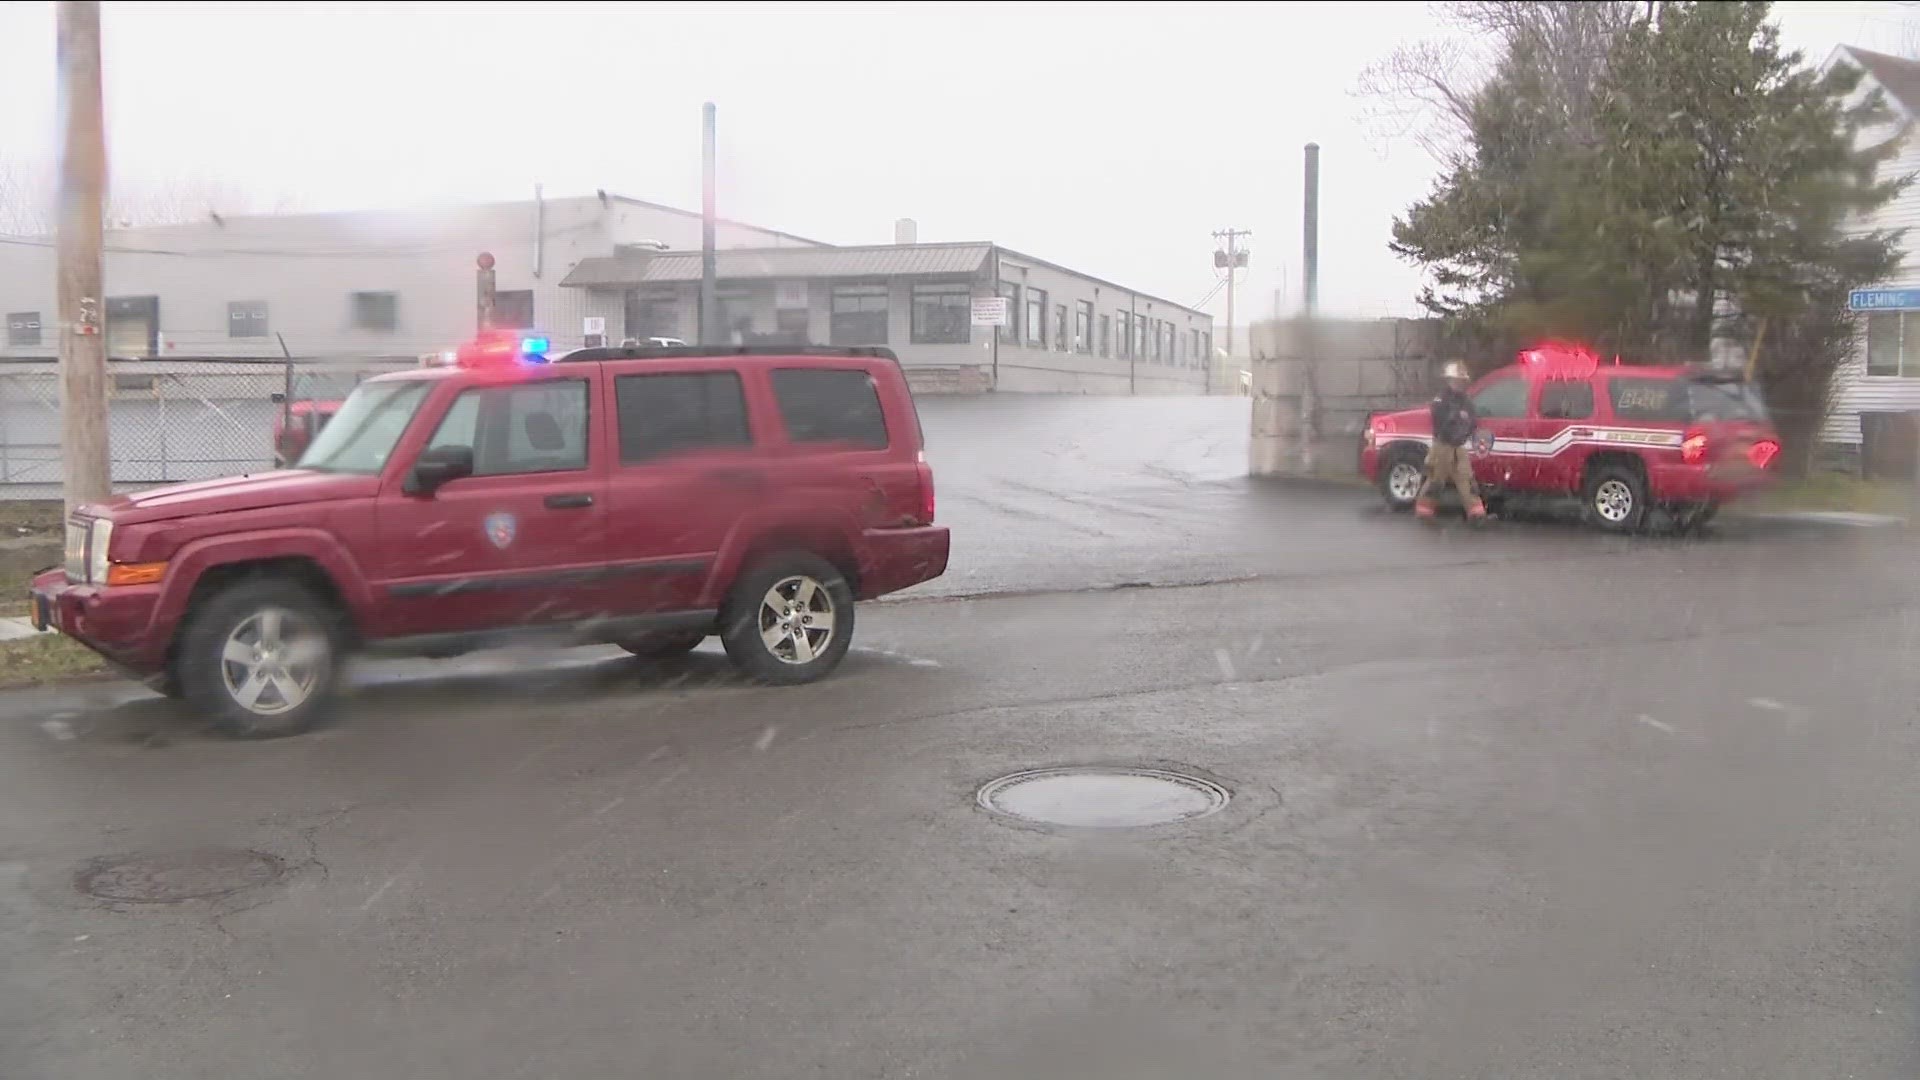 Buffalo Fire department responded to a nitric acid leak in East Buffalo